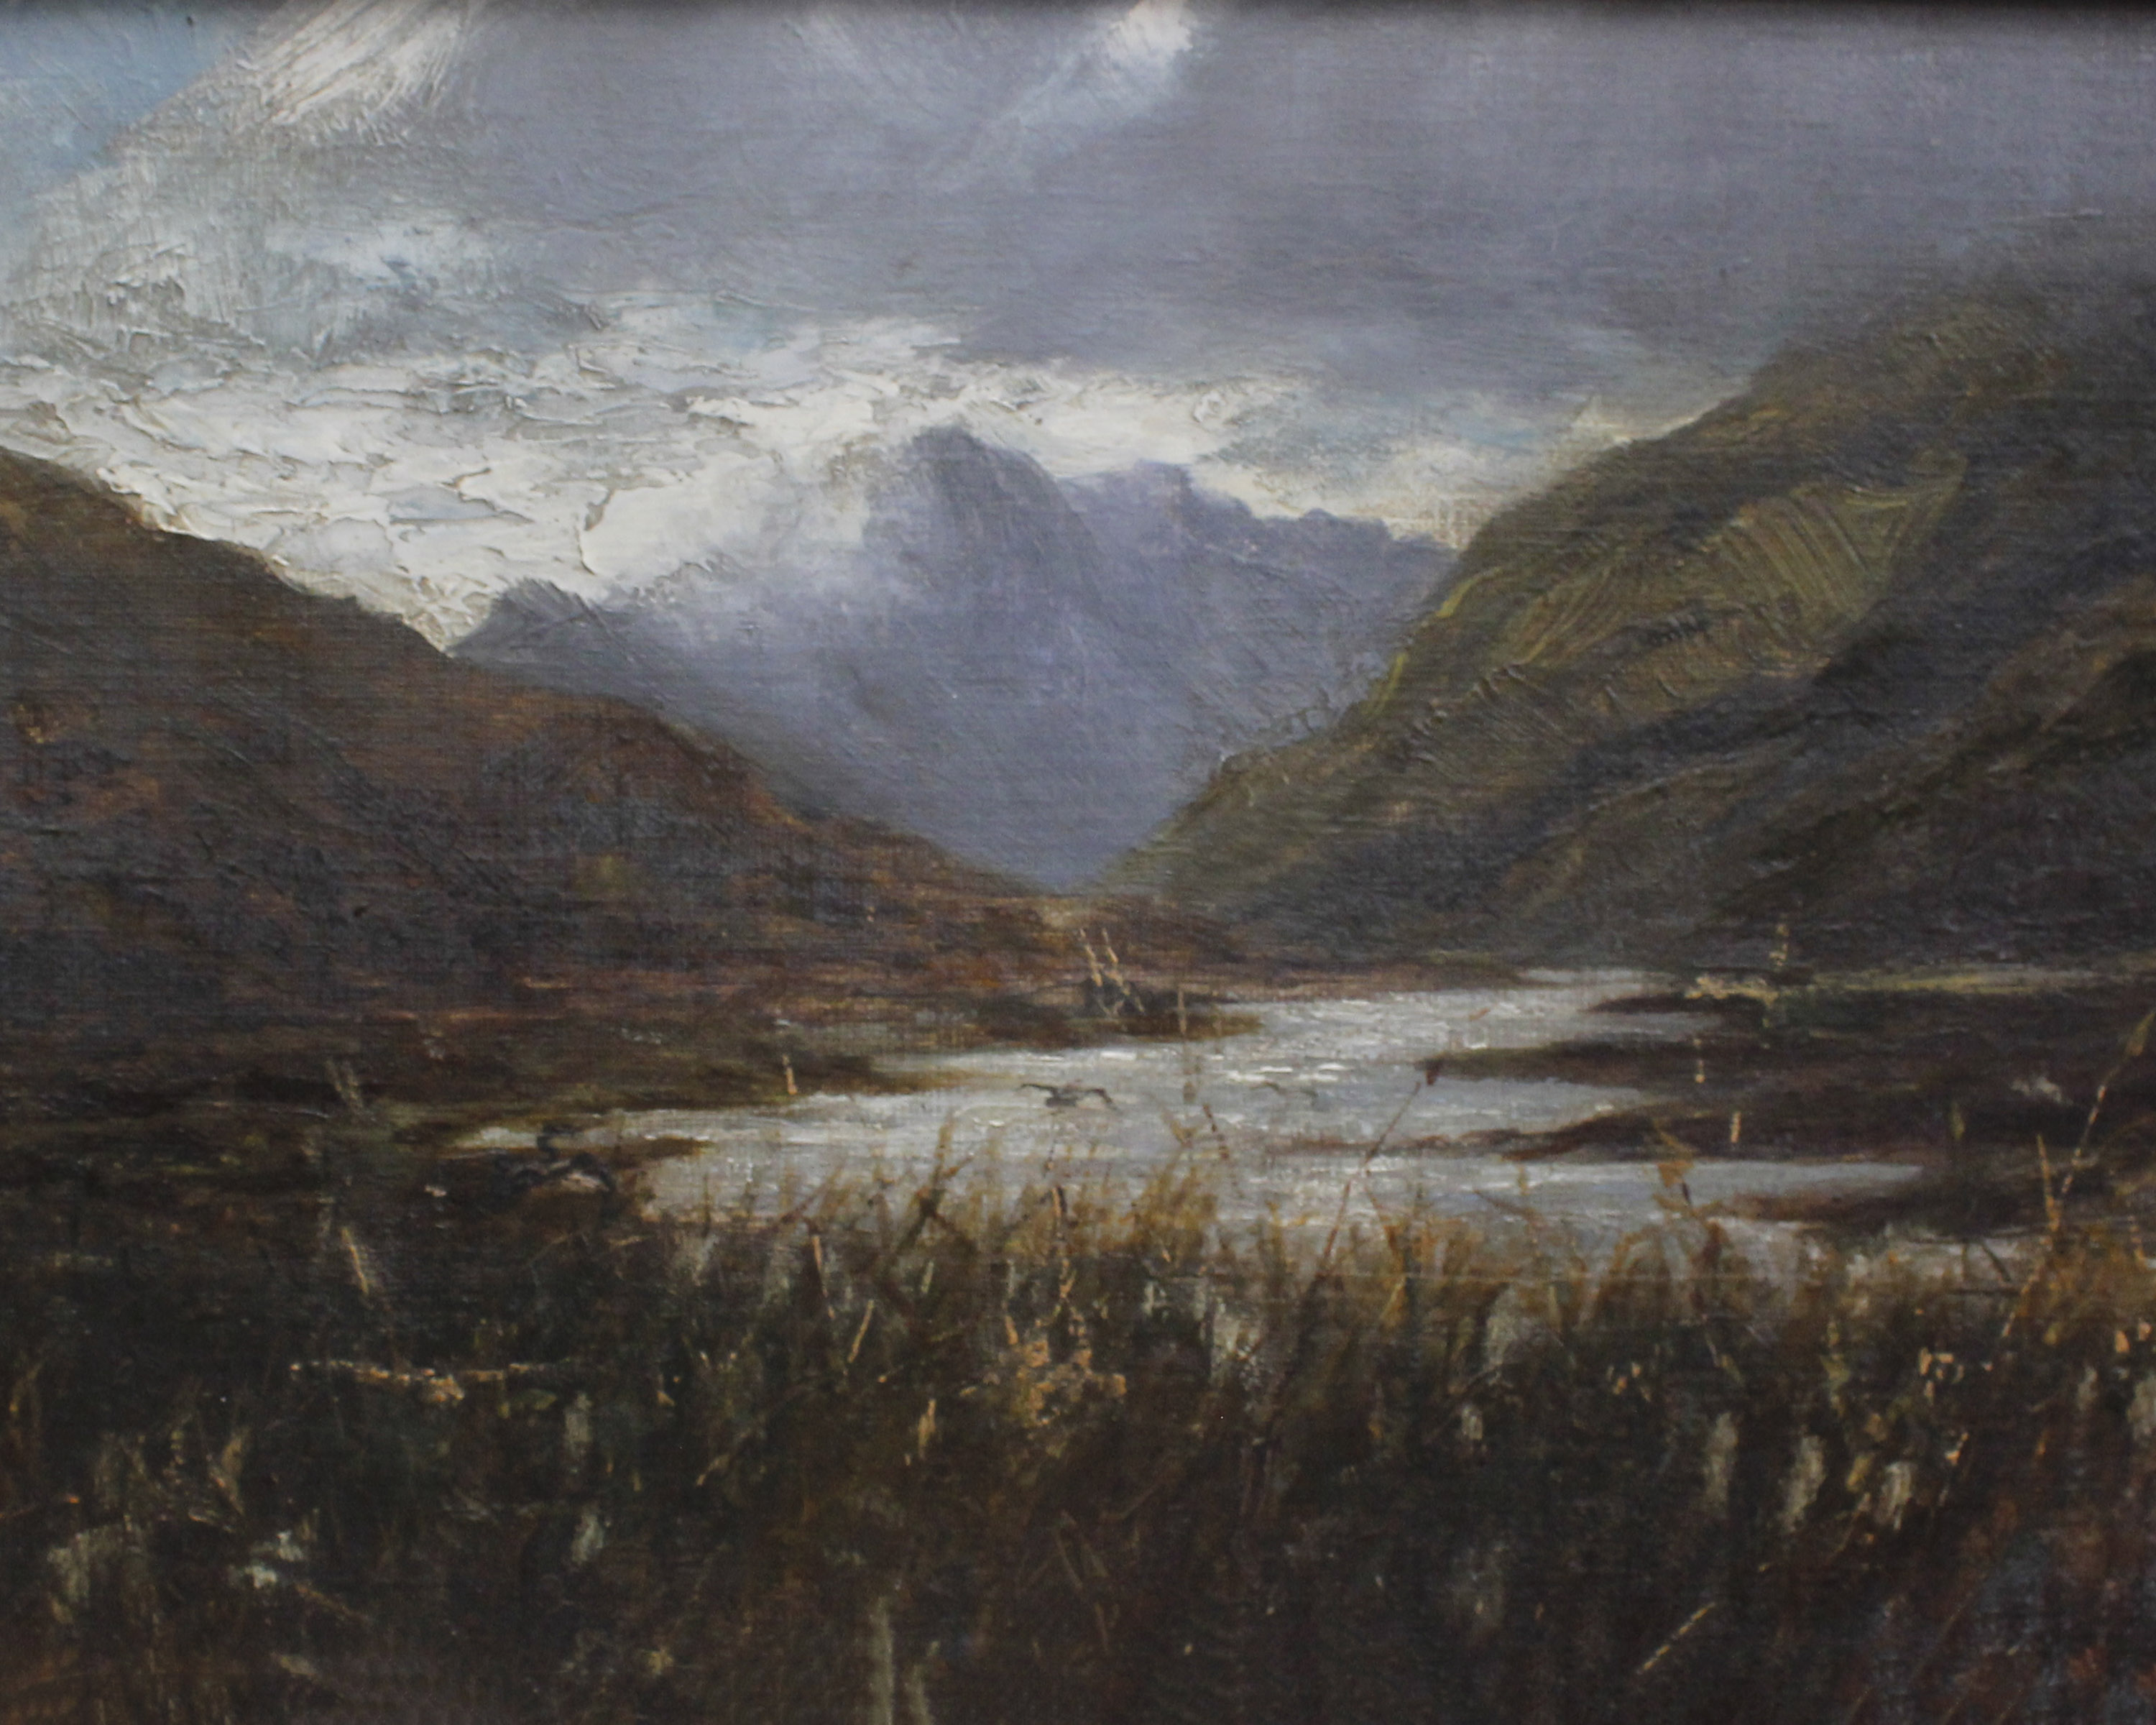 A Landscape Painting Circa 19th Century, Possibly of ScotlandOil on board in gilt frameArtist